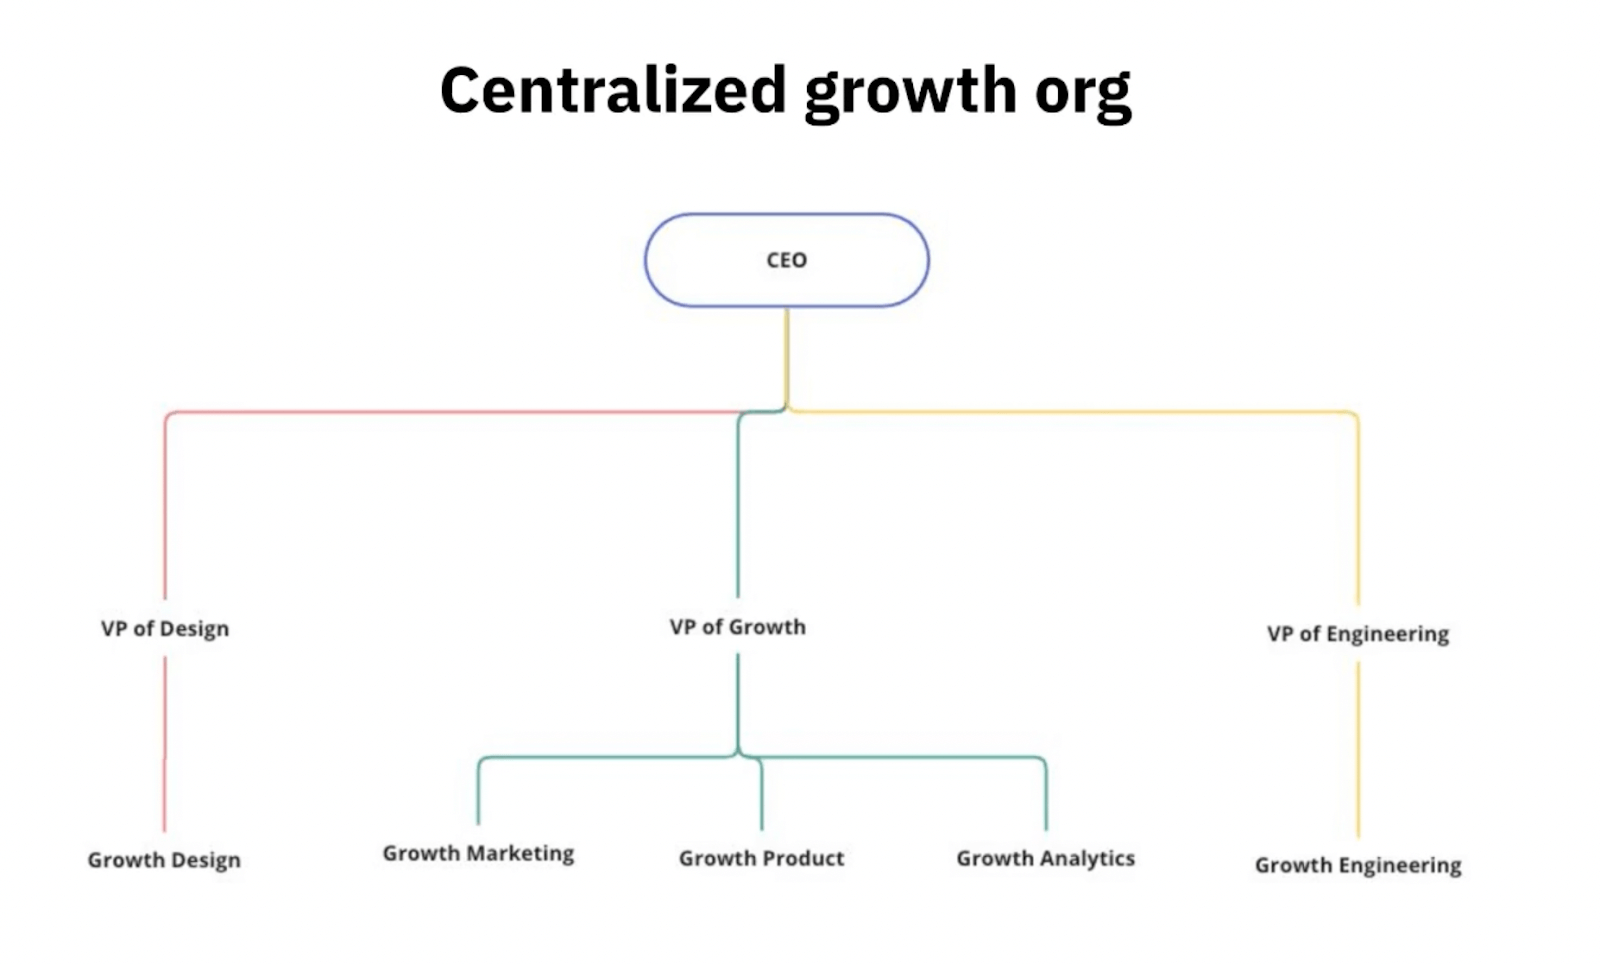 Centralized growth org job role chart